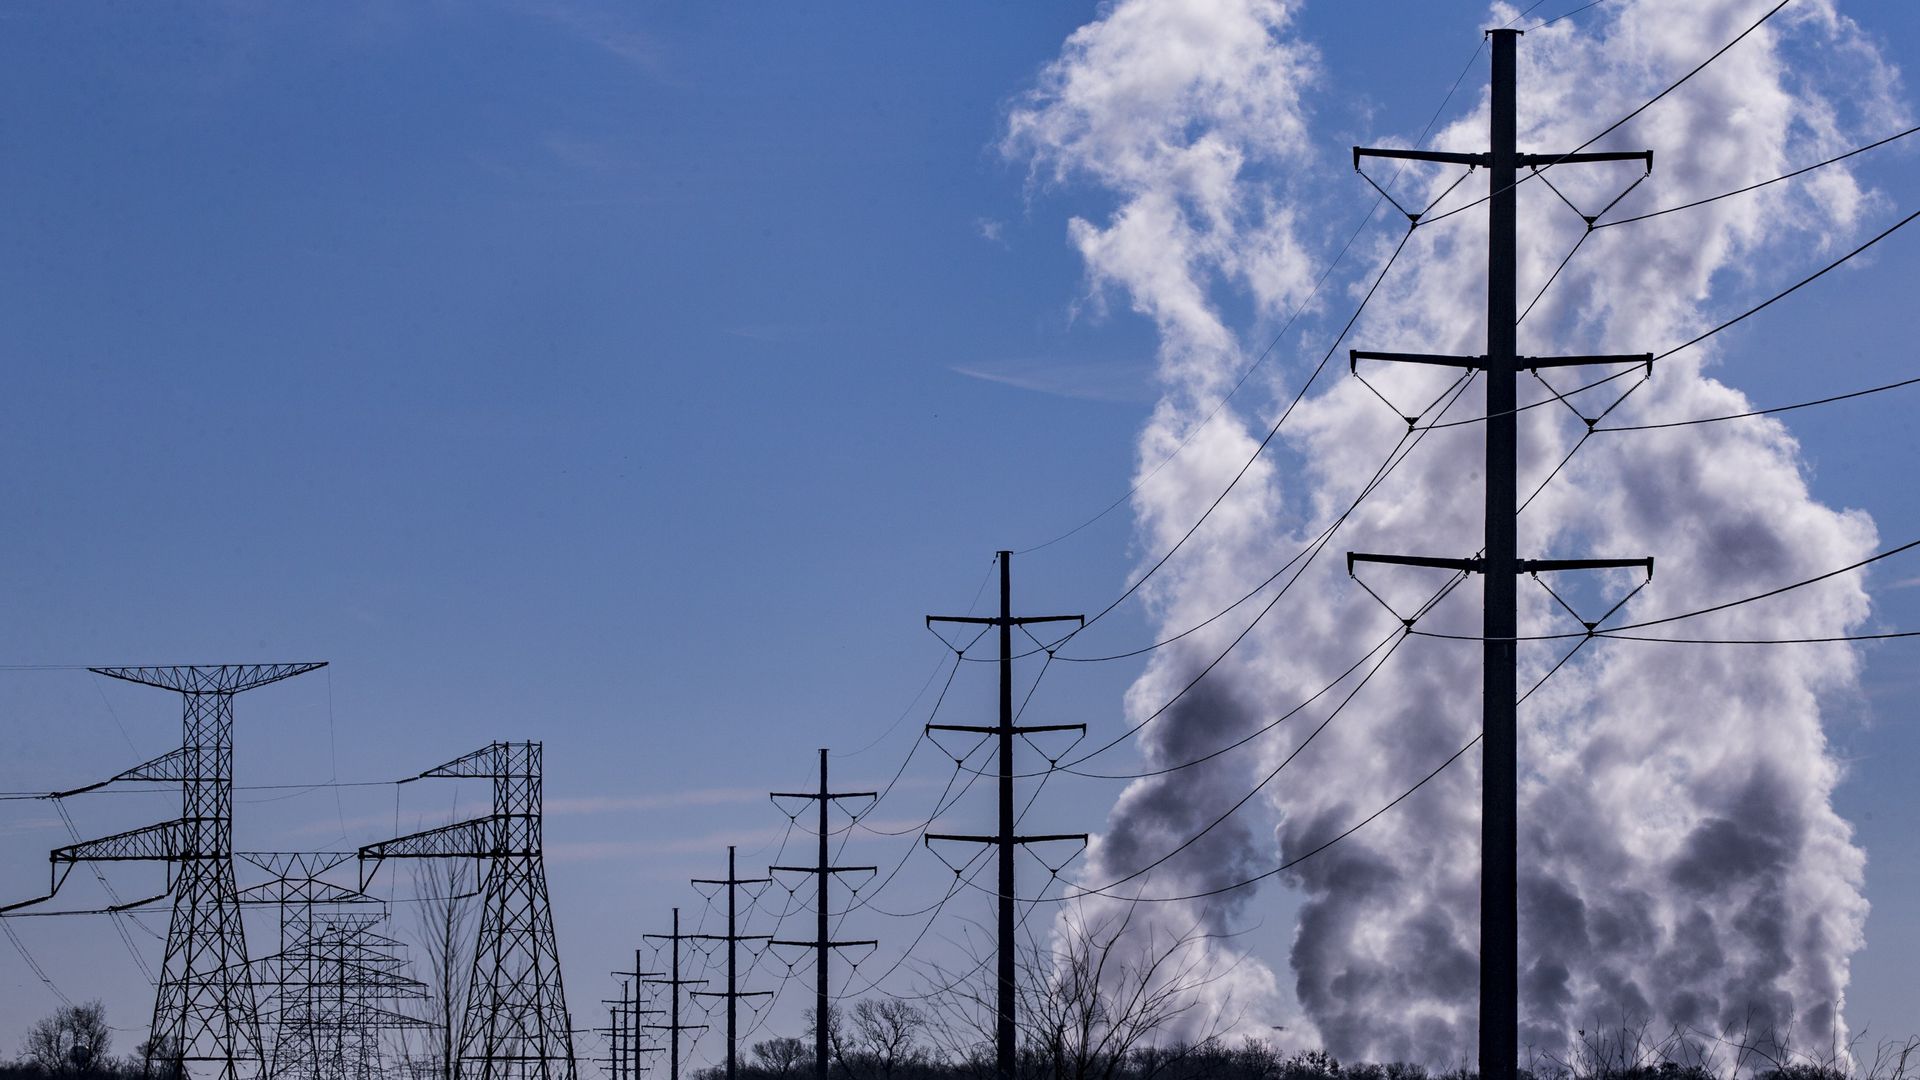 Smoke rises over a power lines, with a clear blue sky in the background.